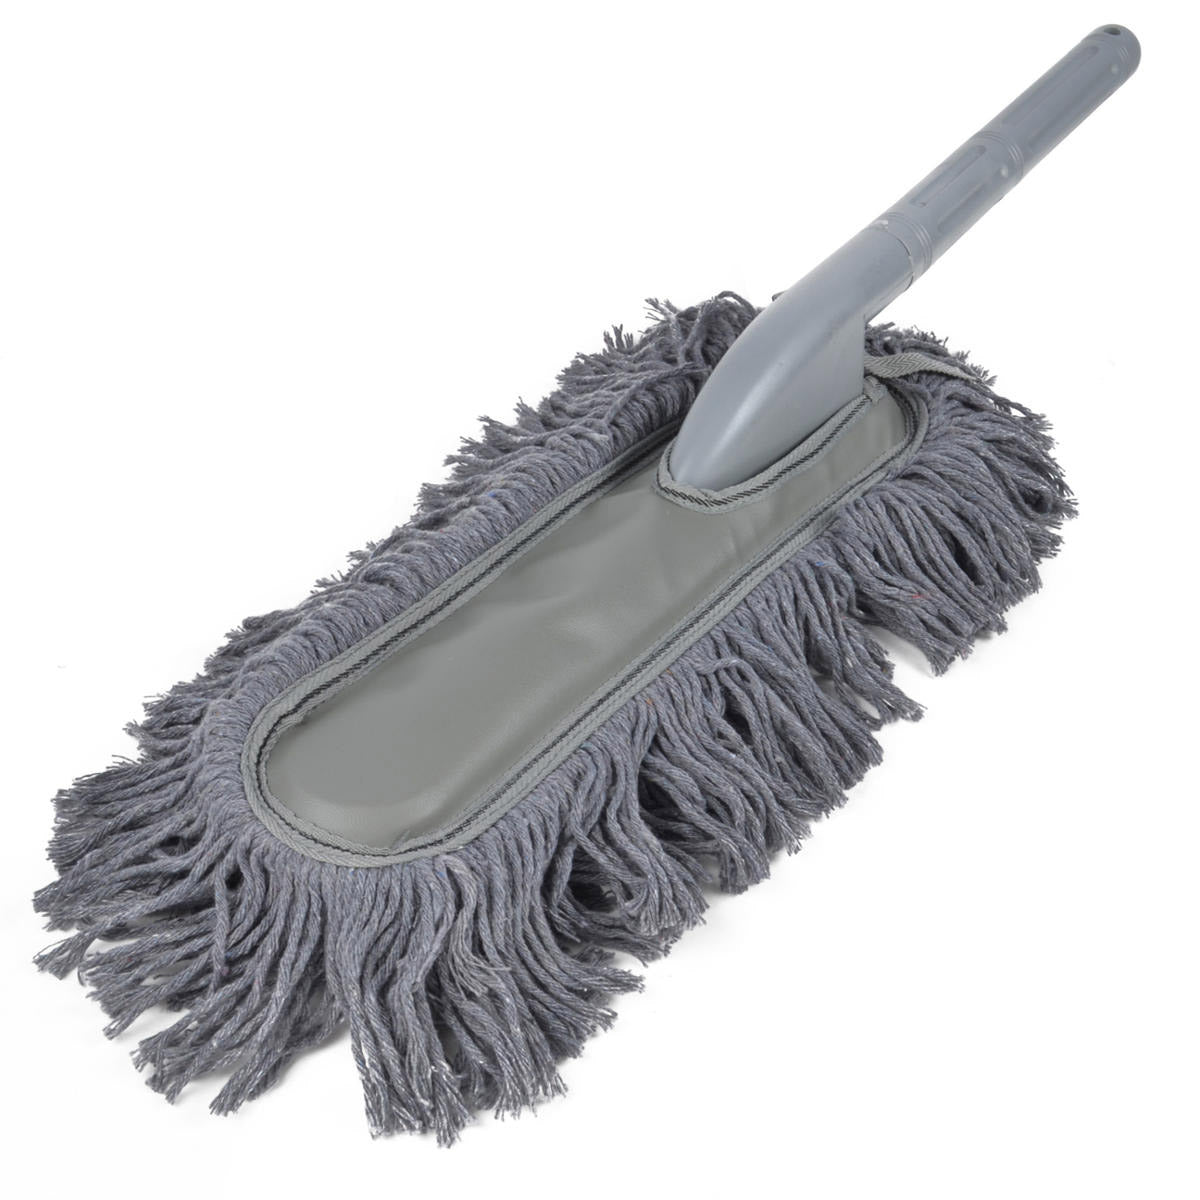 BDK Microfiber Duster Wax Coated Cleaning Mop Dust Home Office Car Tool